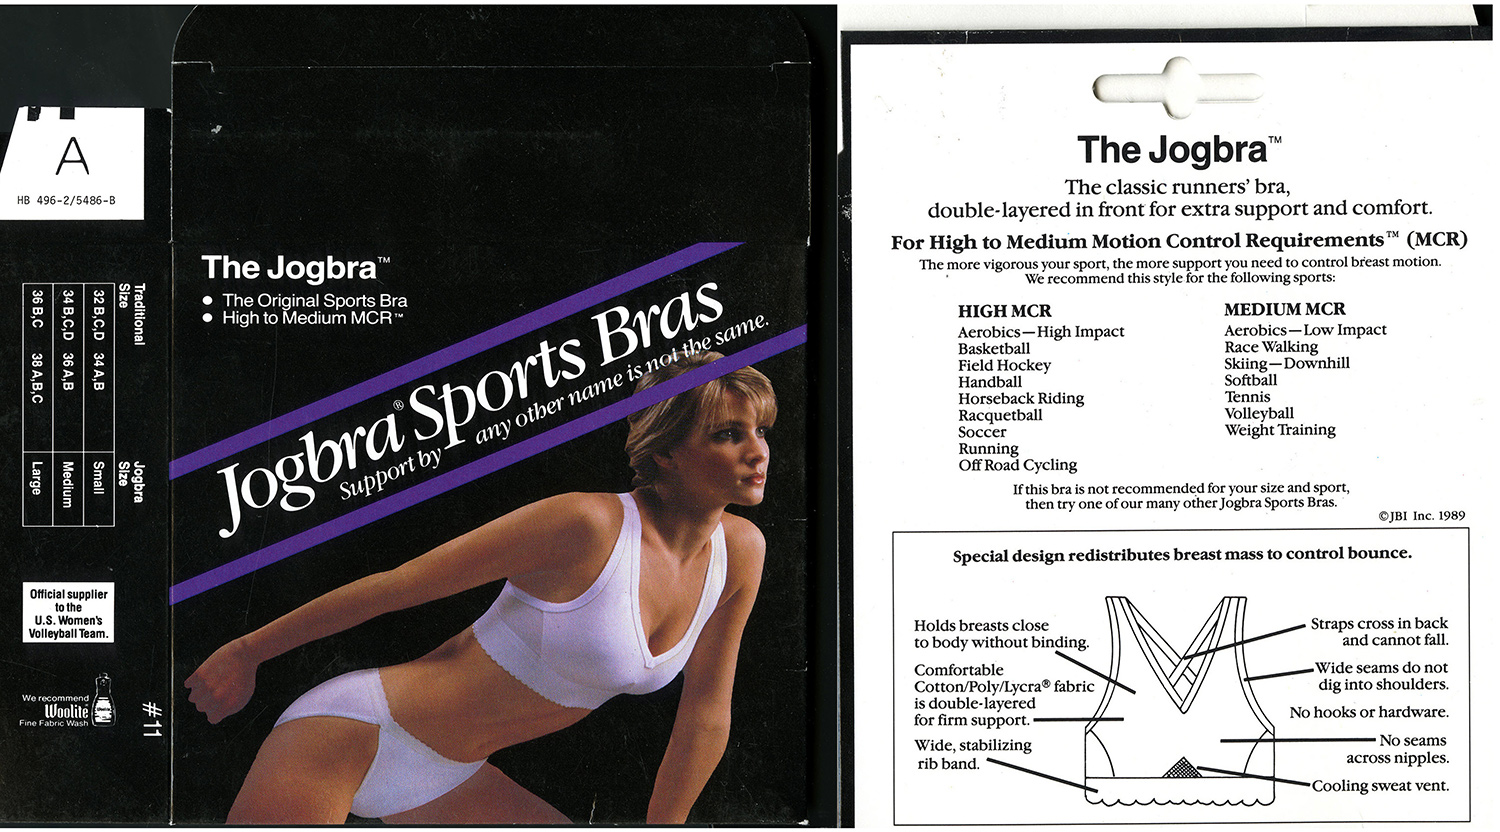 Inventor of sports bra talks about product origin: 'It was not